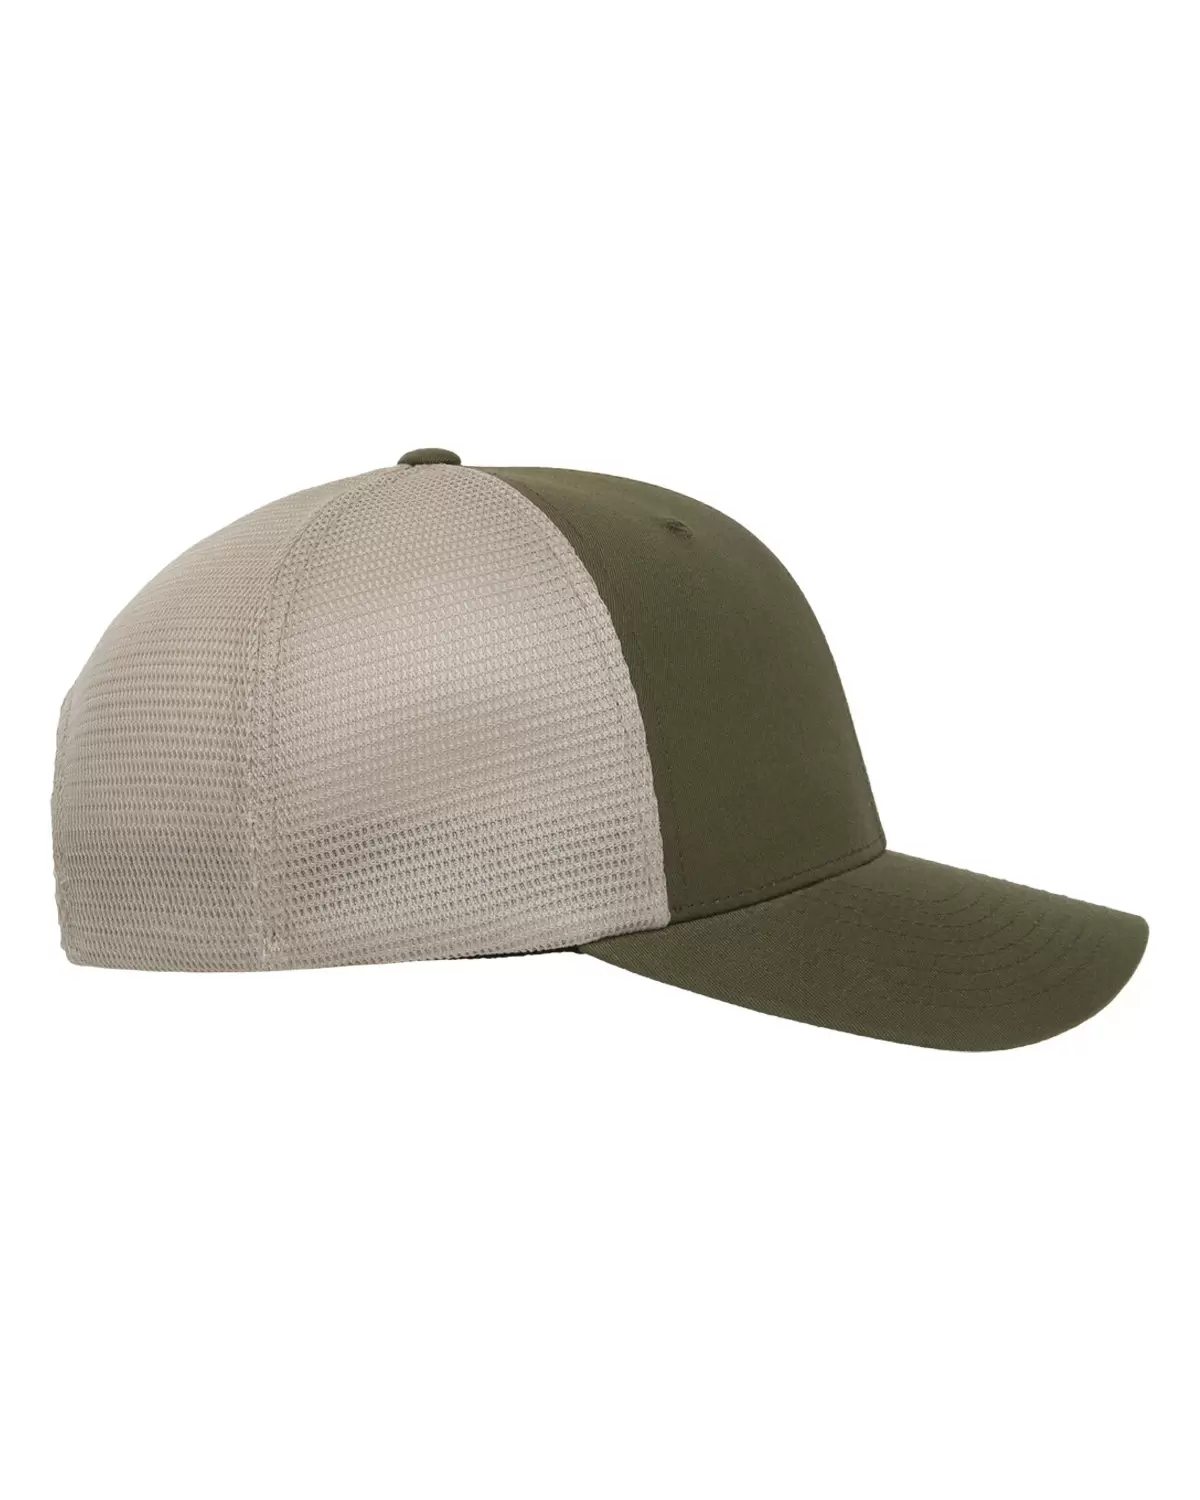 110® Mesh-Back Fit 110M Cap - From Yupoong-Flex